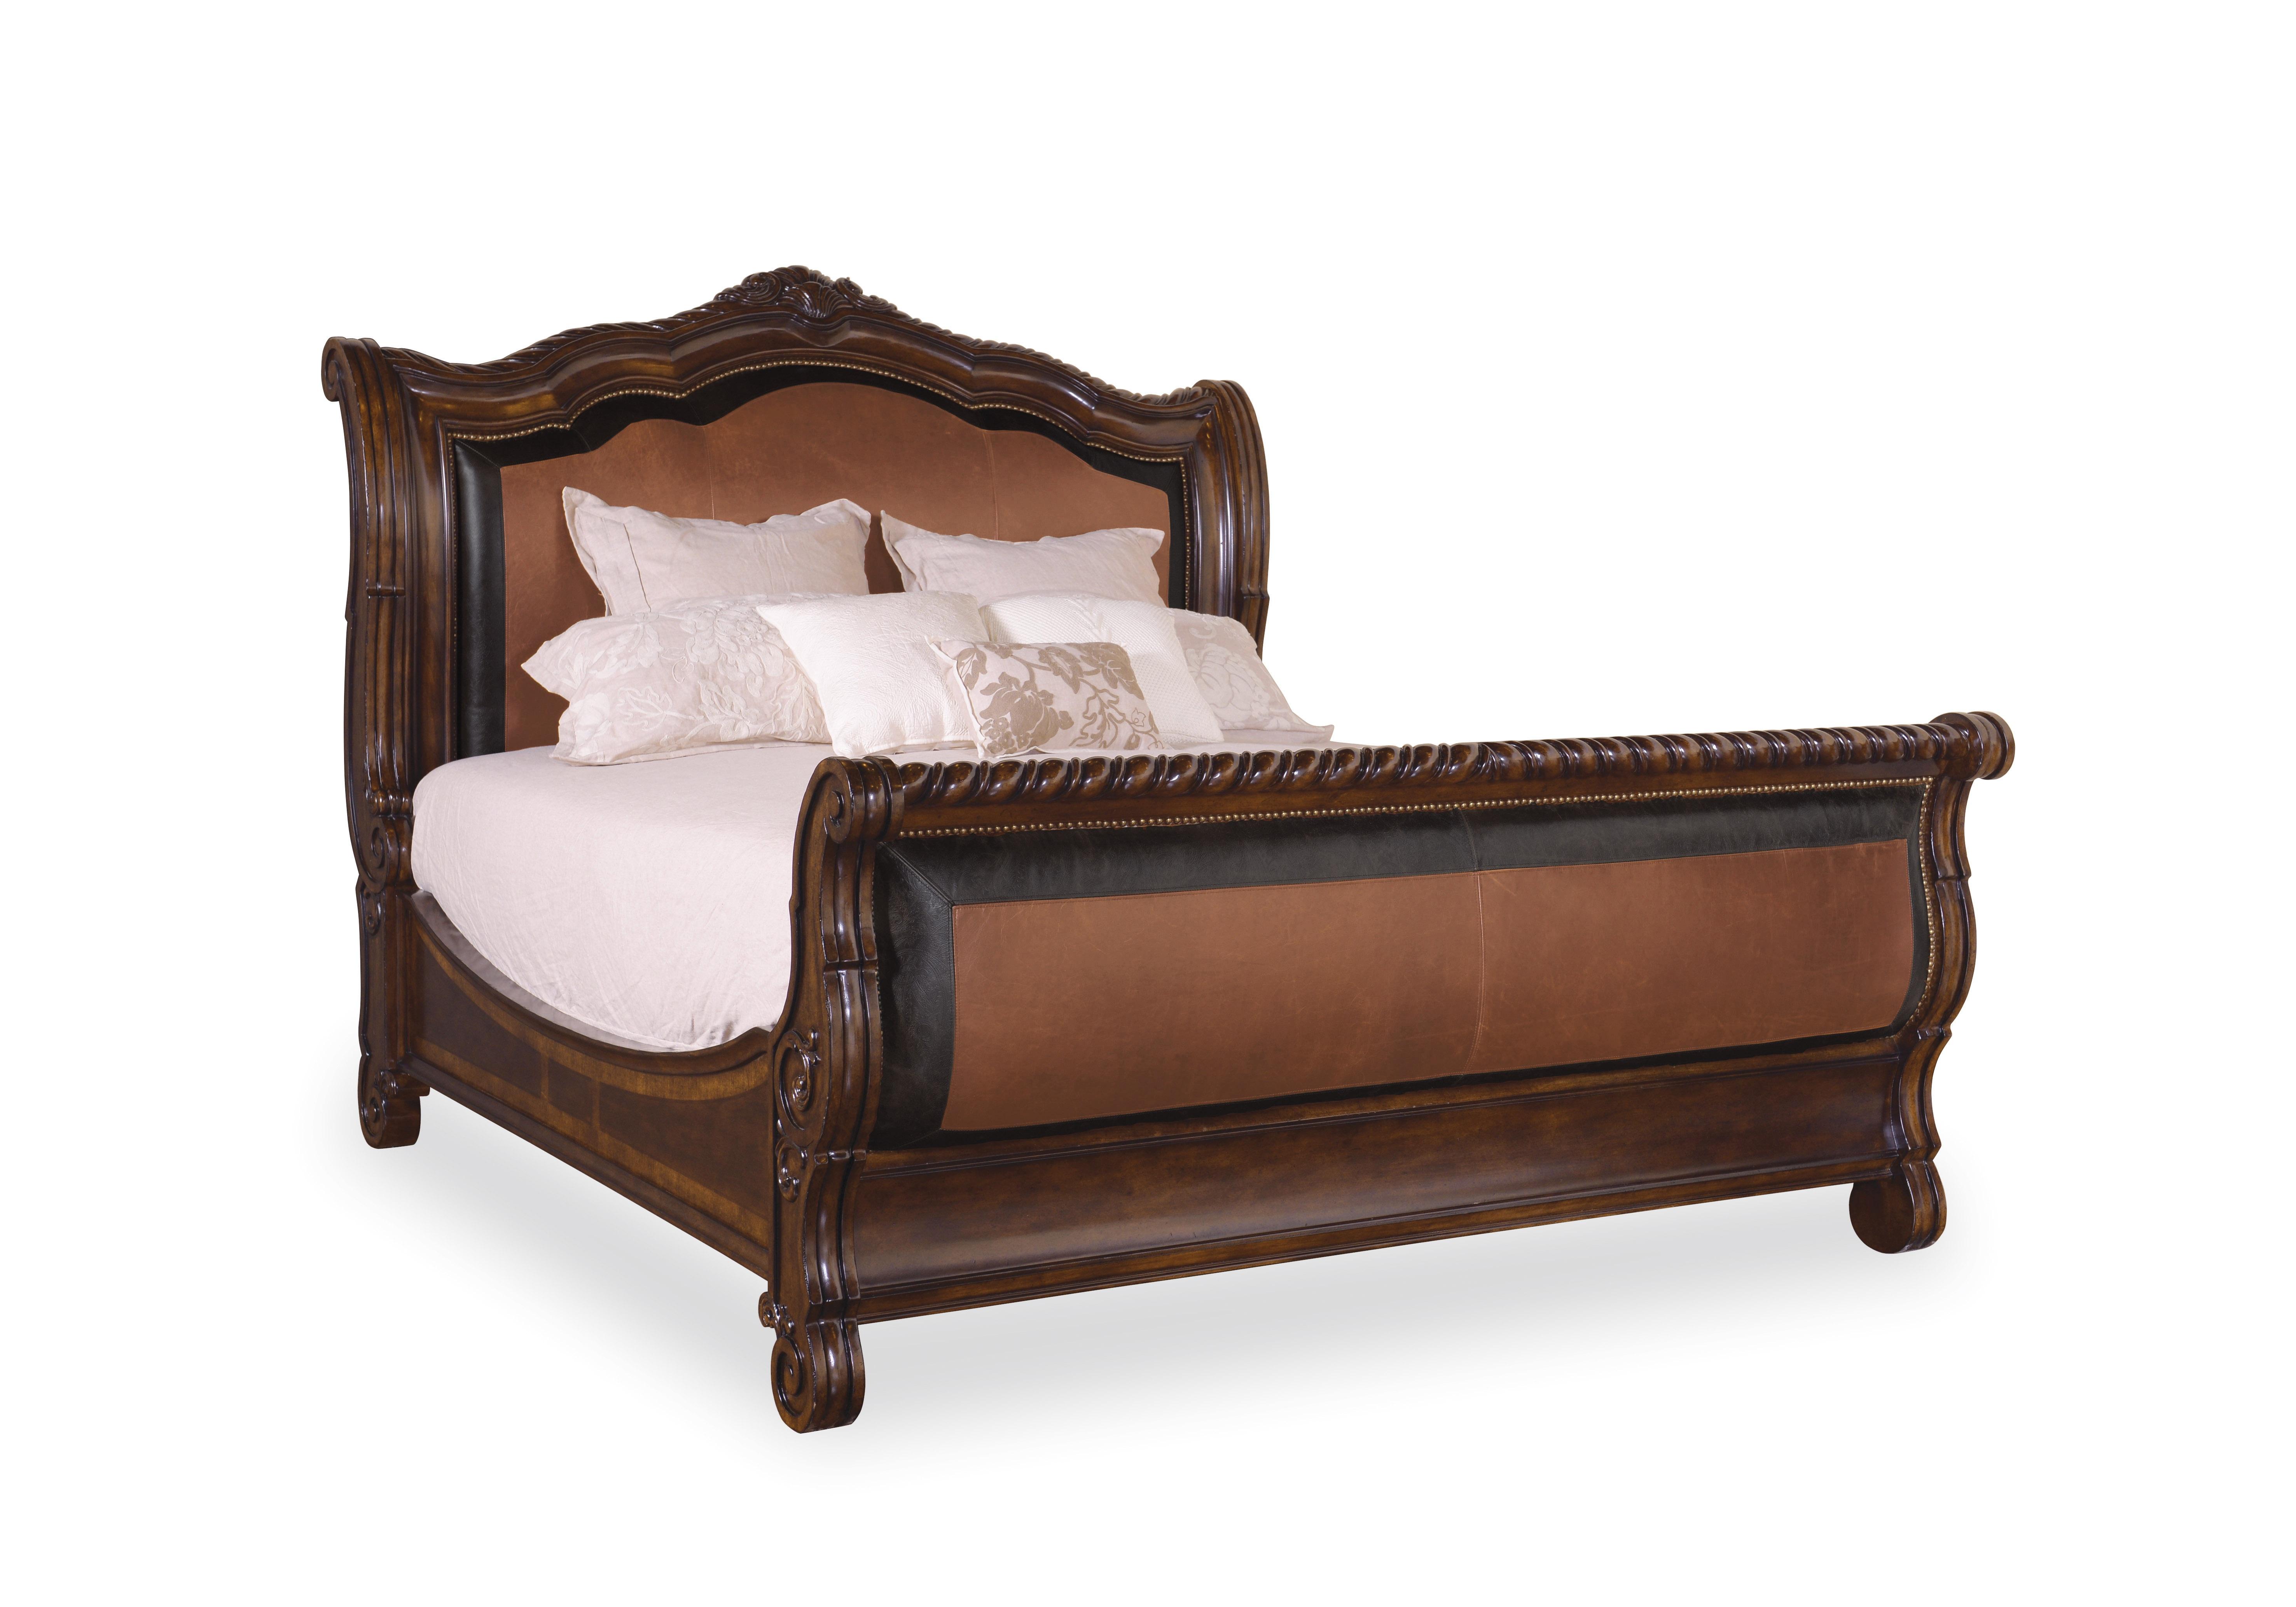 Traditional Sleigh Bed Valencia 209147-2304 in Dark Oak Faux Leather